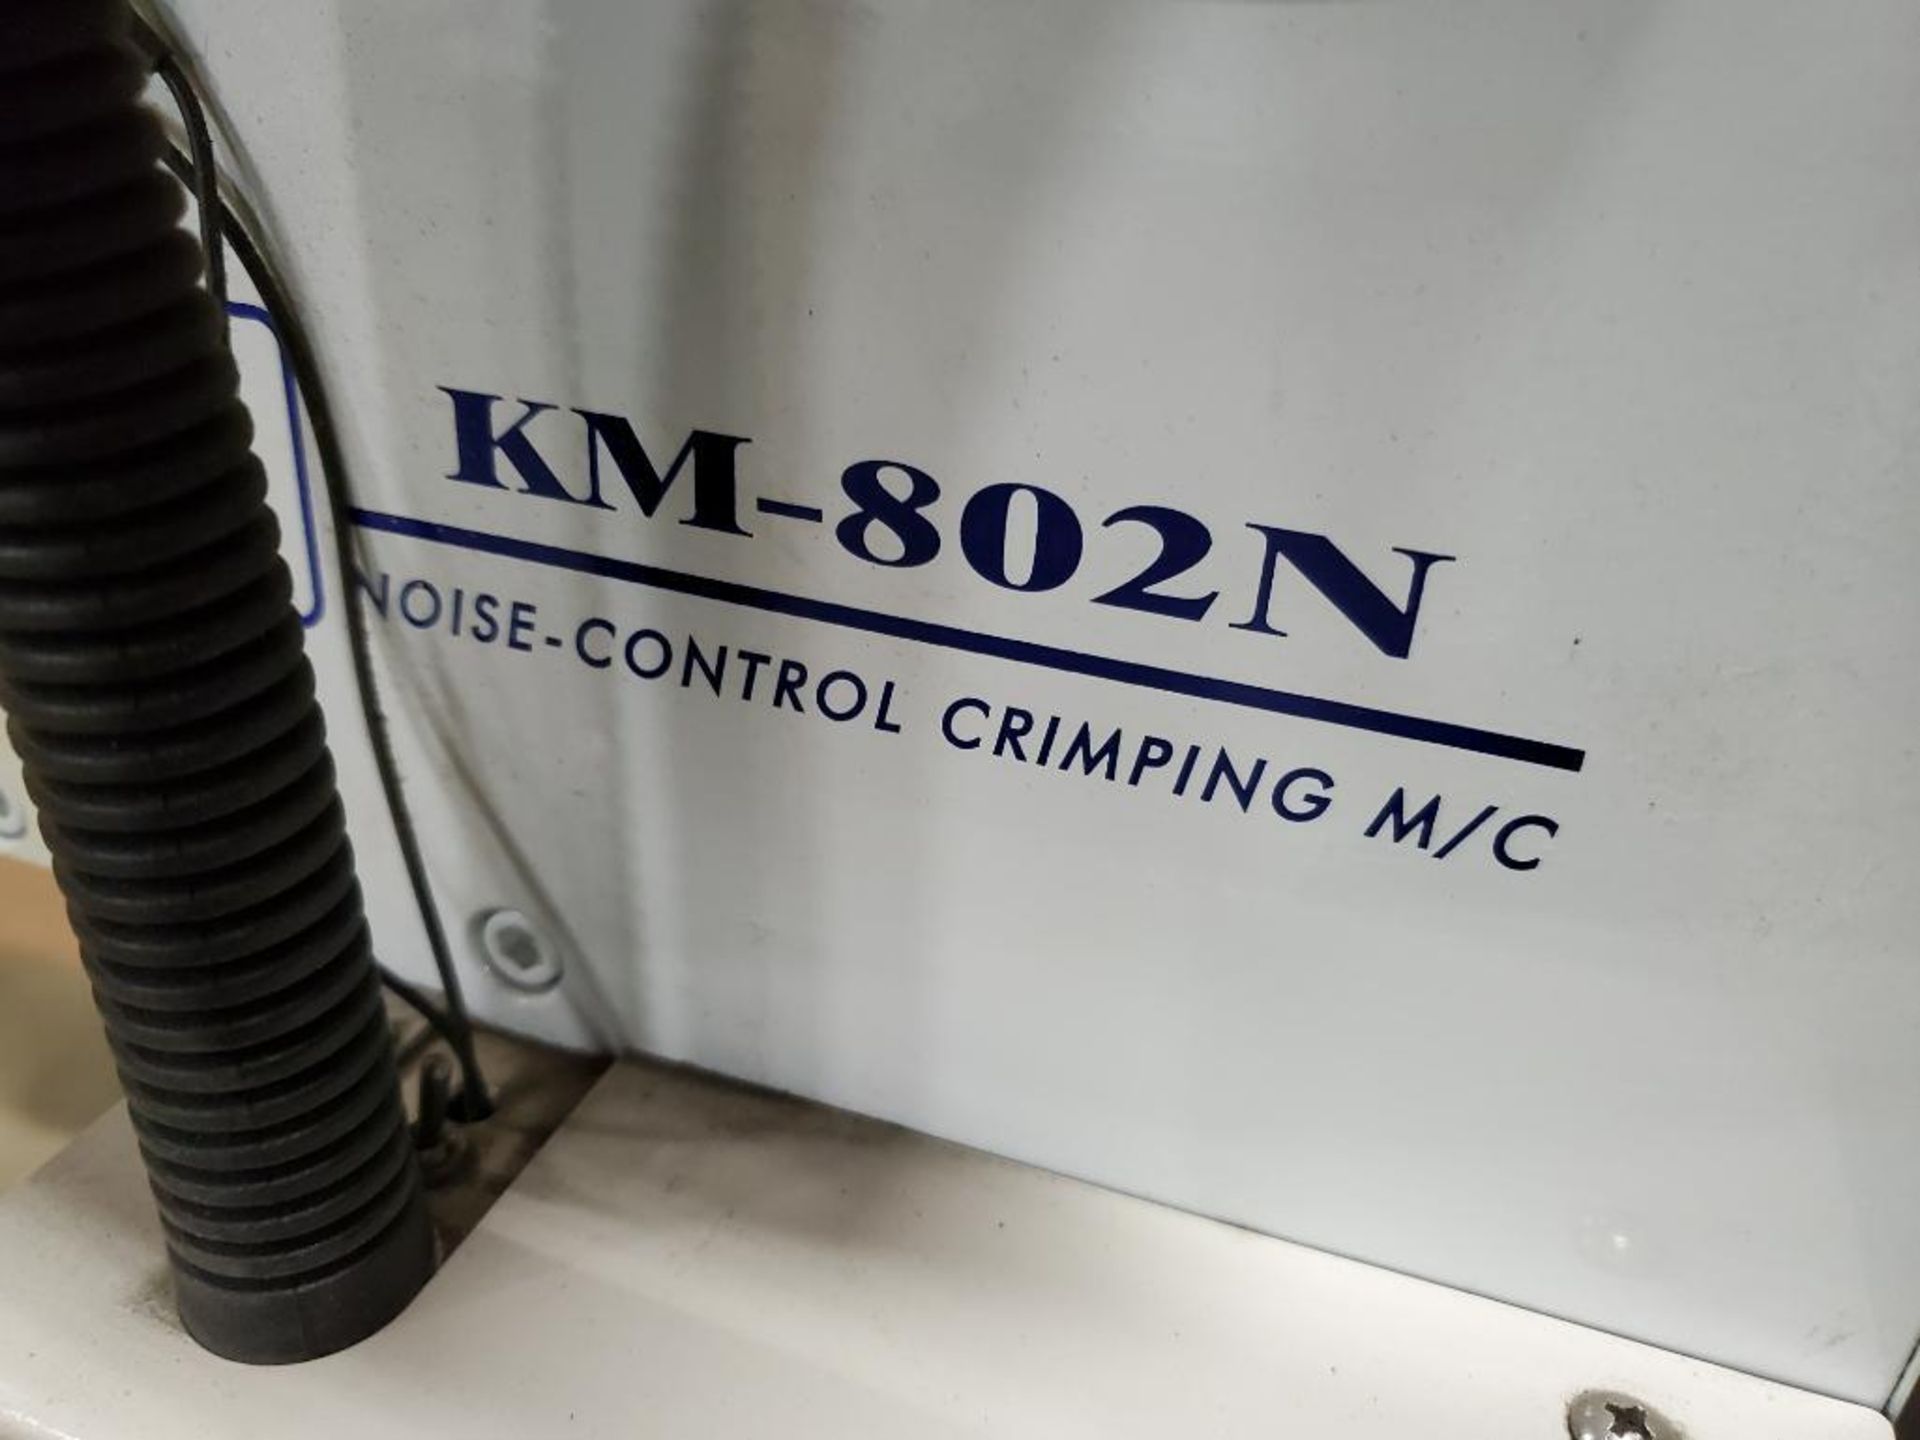 KM Digitech terminal crimping machine. Model KM-802N. Includes spade connector die as pictured. - Image 2 of 10